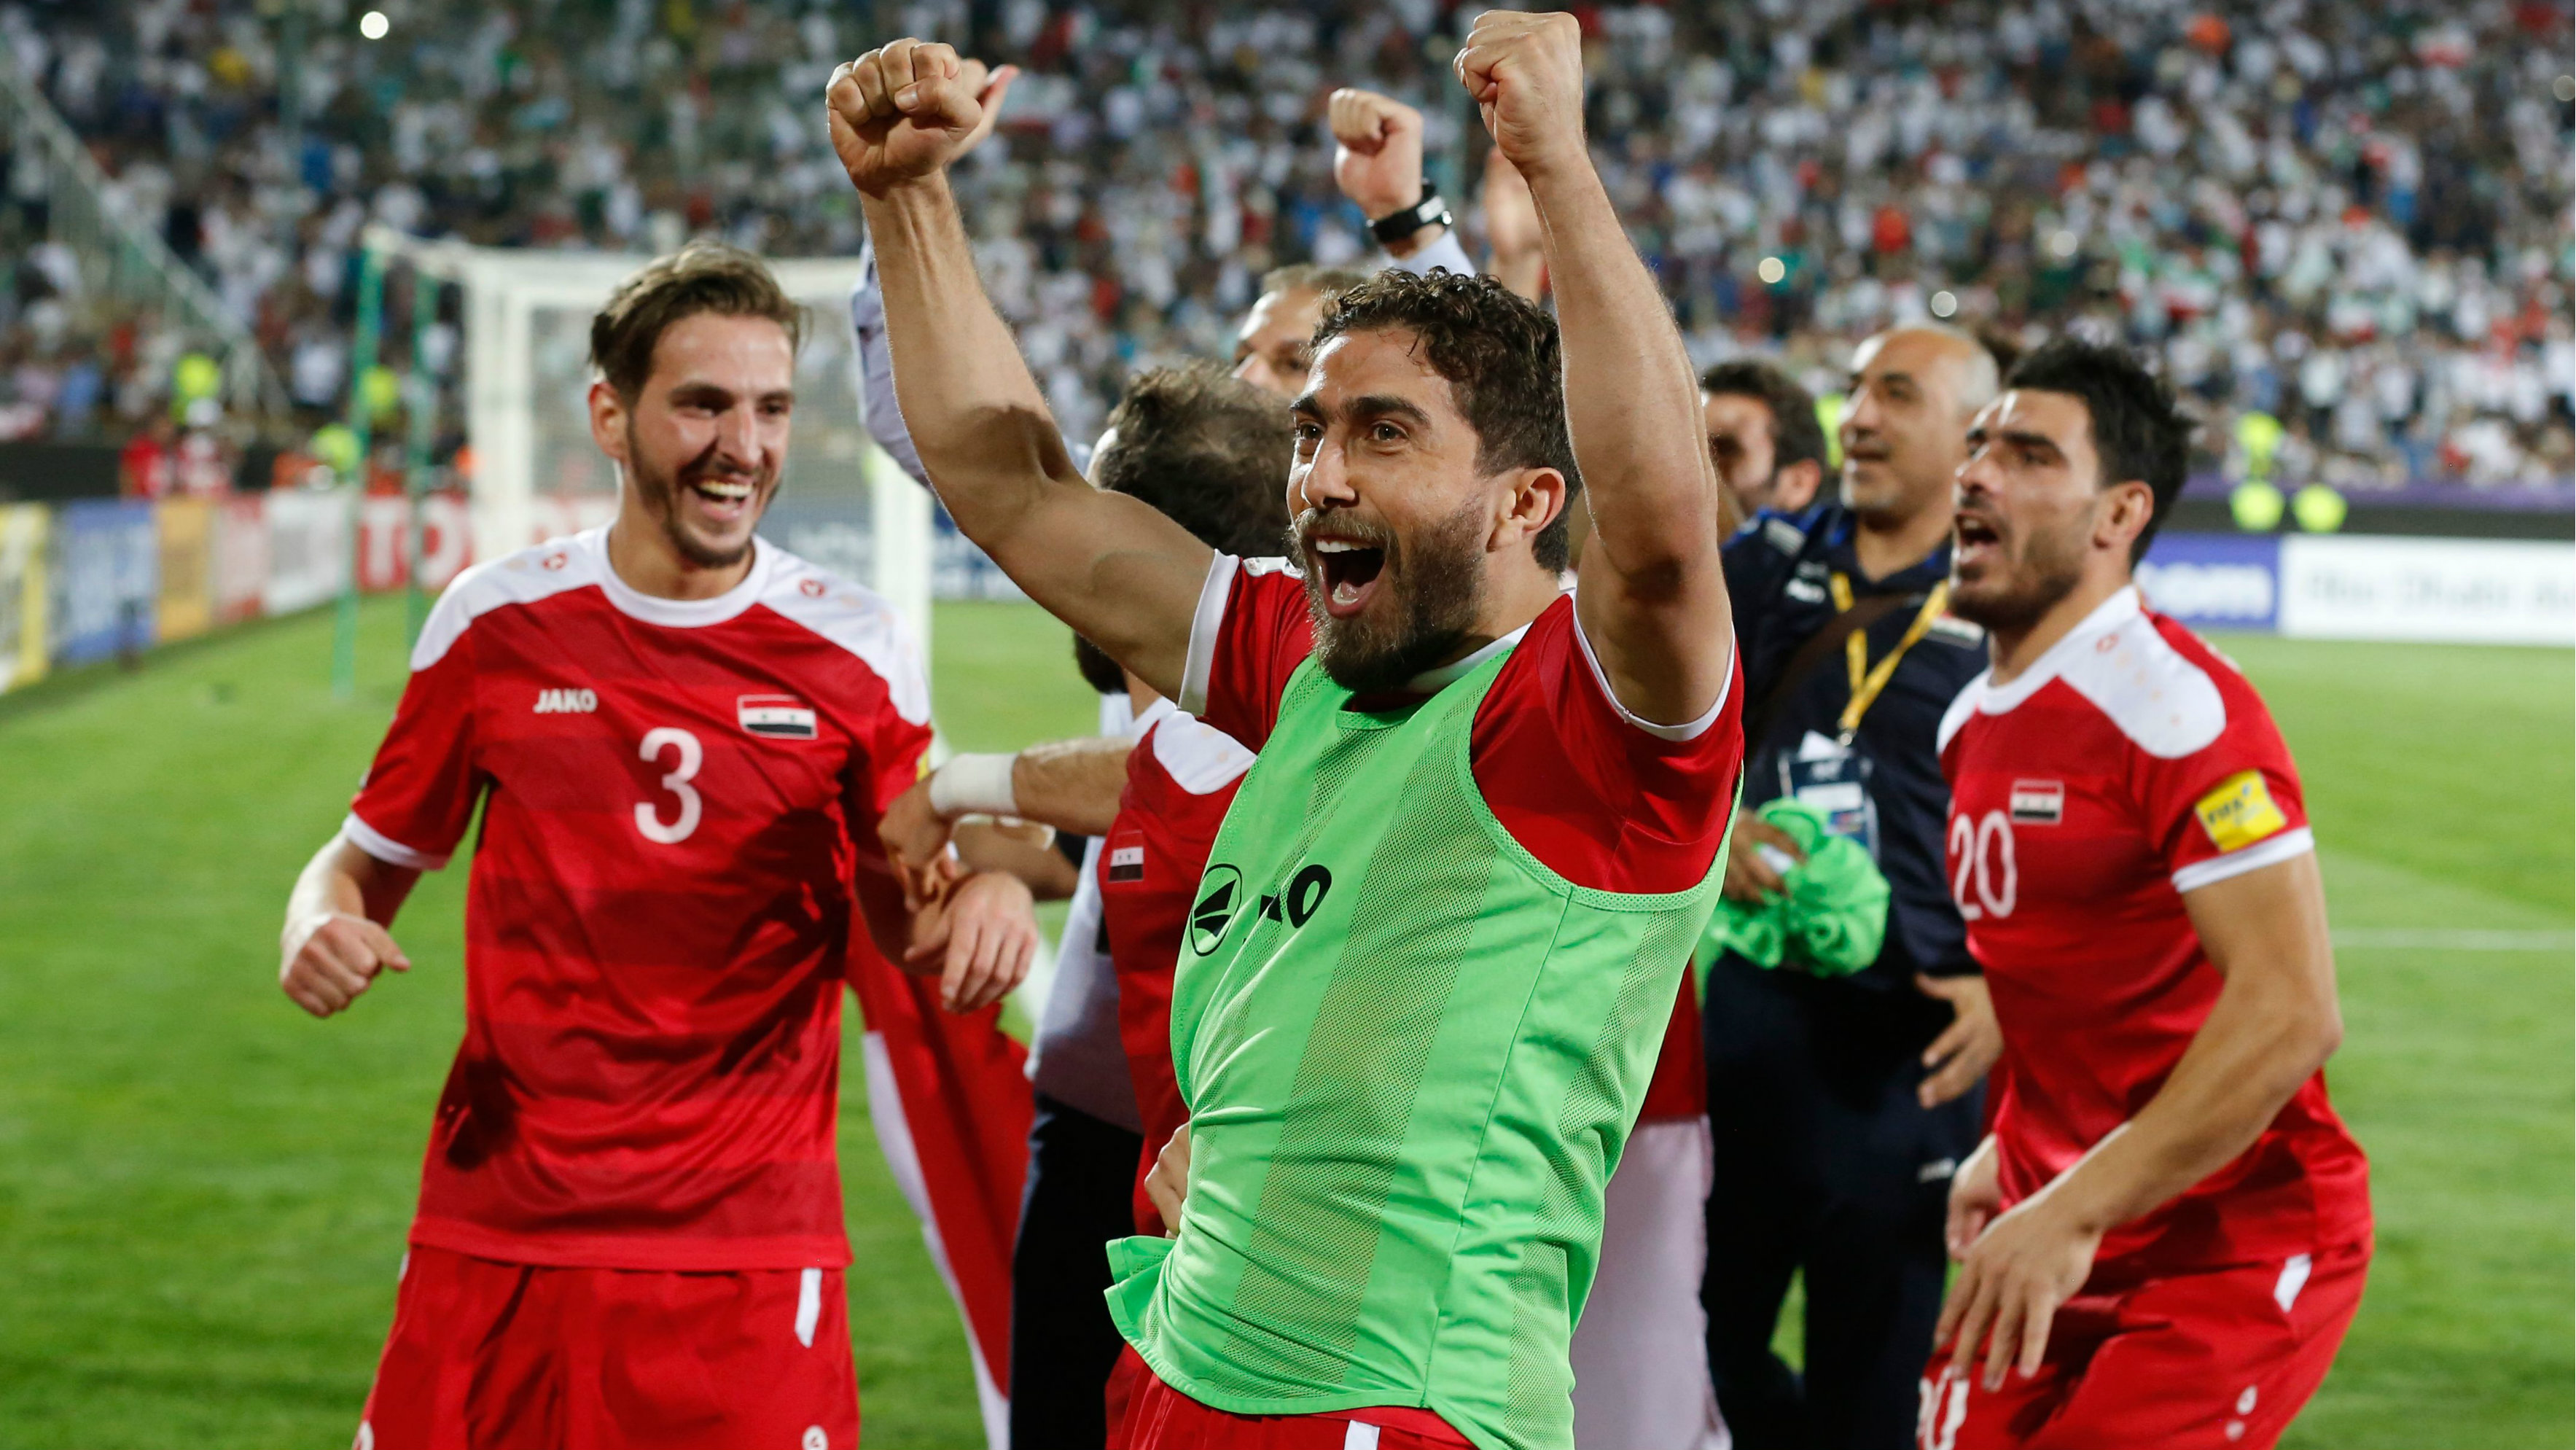 Syria players celebrate their 2-2 draw with Iran, which set up the clash with the Caltex Socceroos.